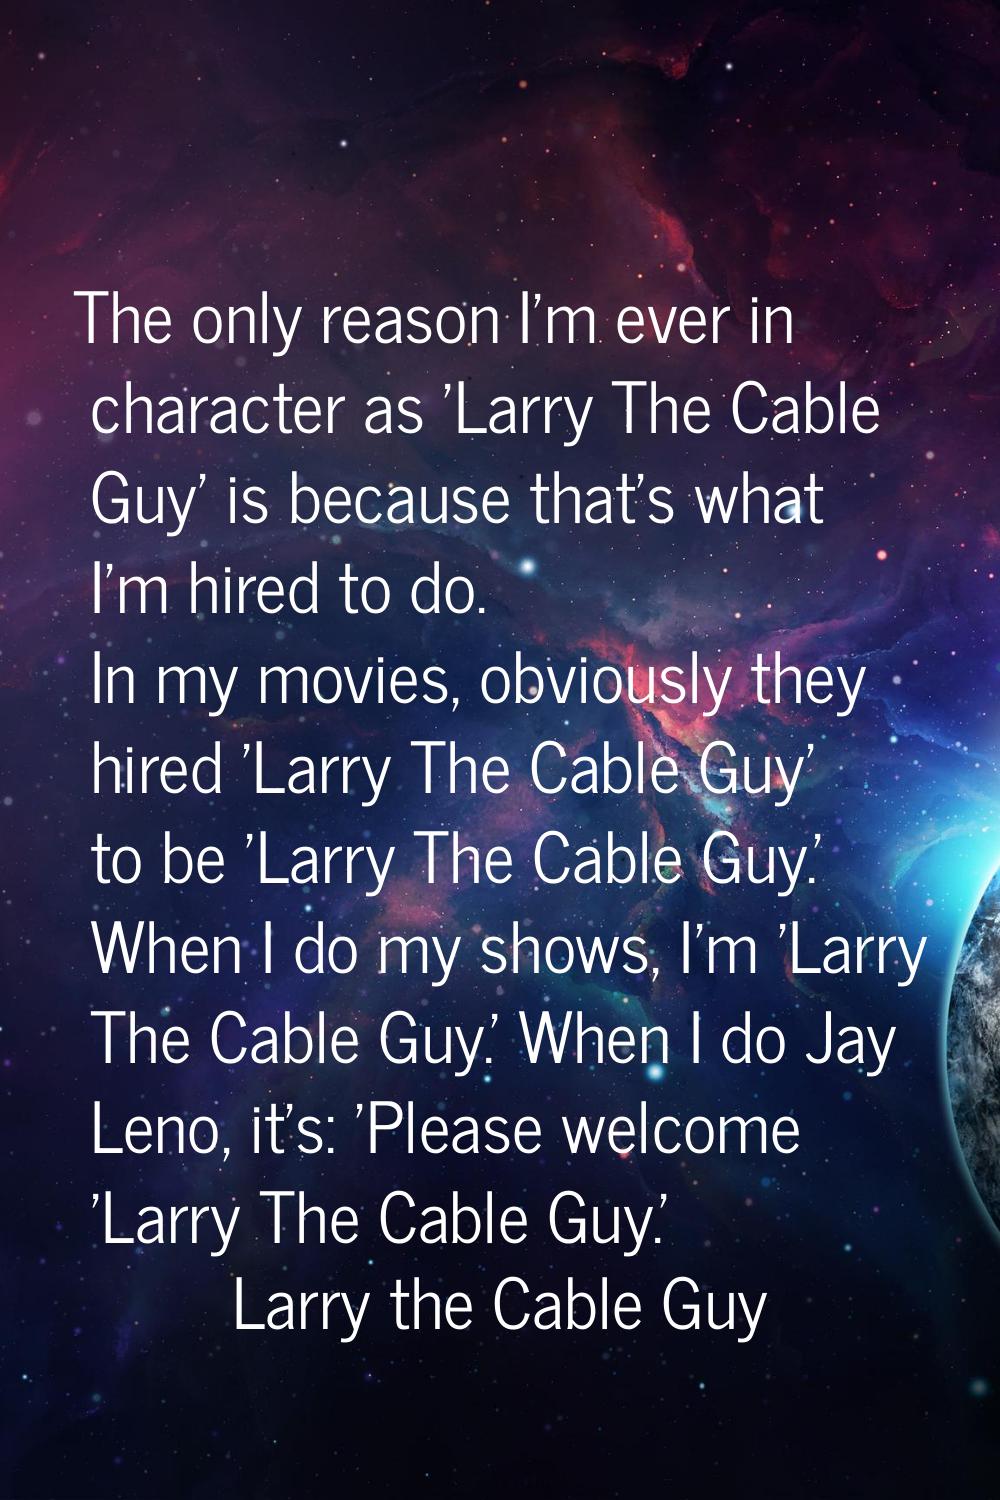 The only reason I'm ever in character as 'Larry The Cable Guy' is because that's what I'm hired to 